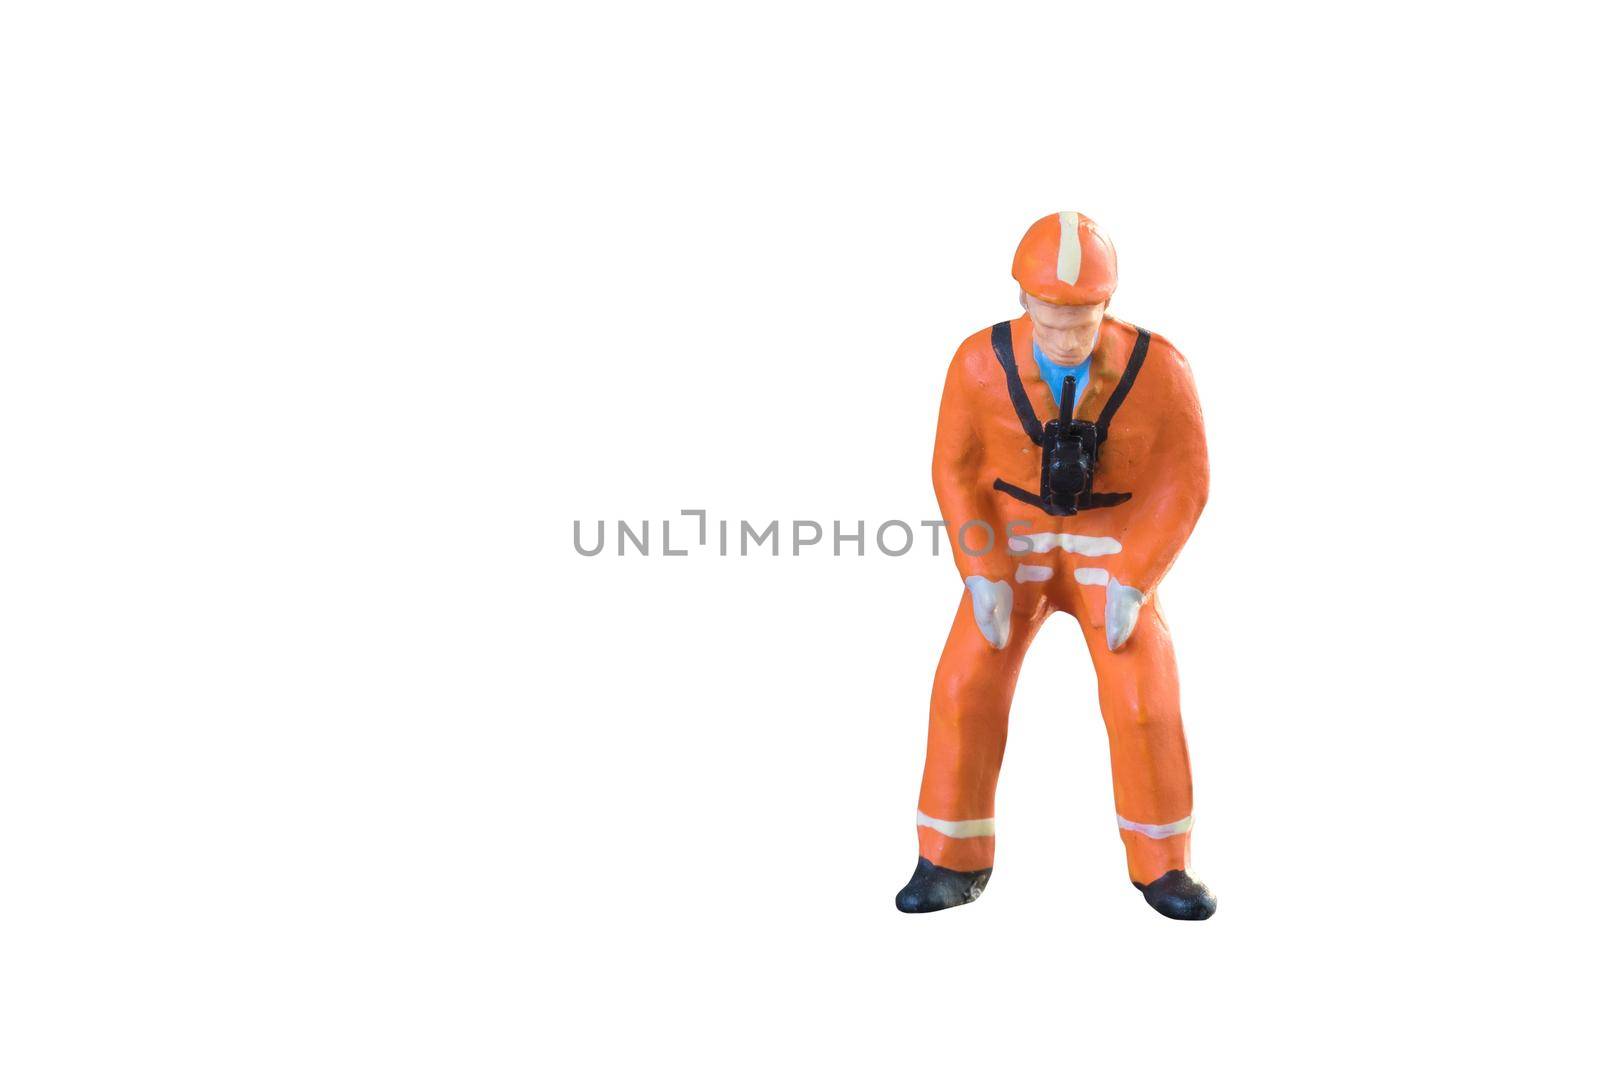 Miniature people engineer and worker occupation isolated with clipping paht on white background. Elegant Design with copy space for placement your text, mock up for industrial and construction conce by Nuamfolio